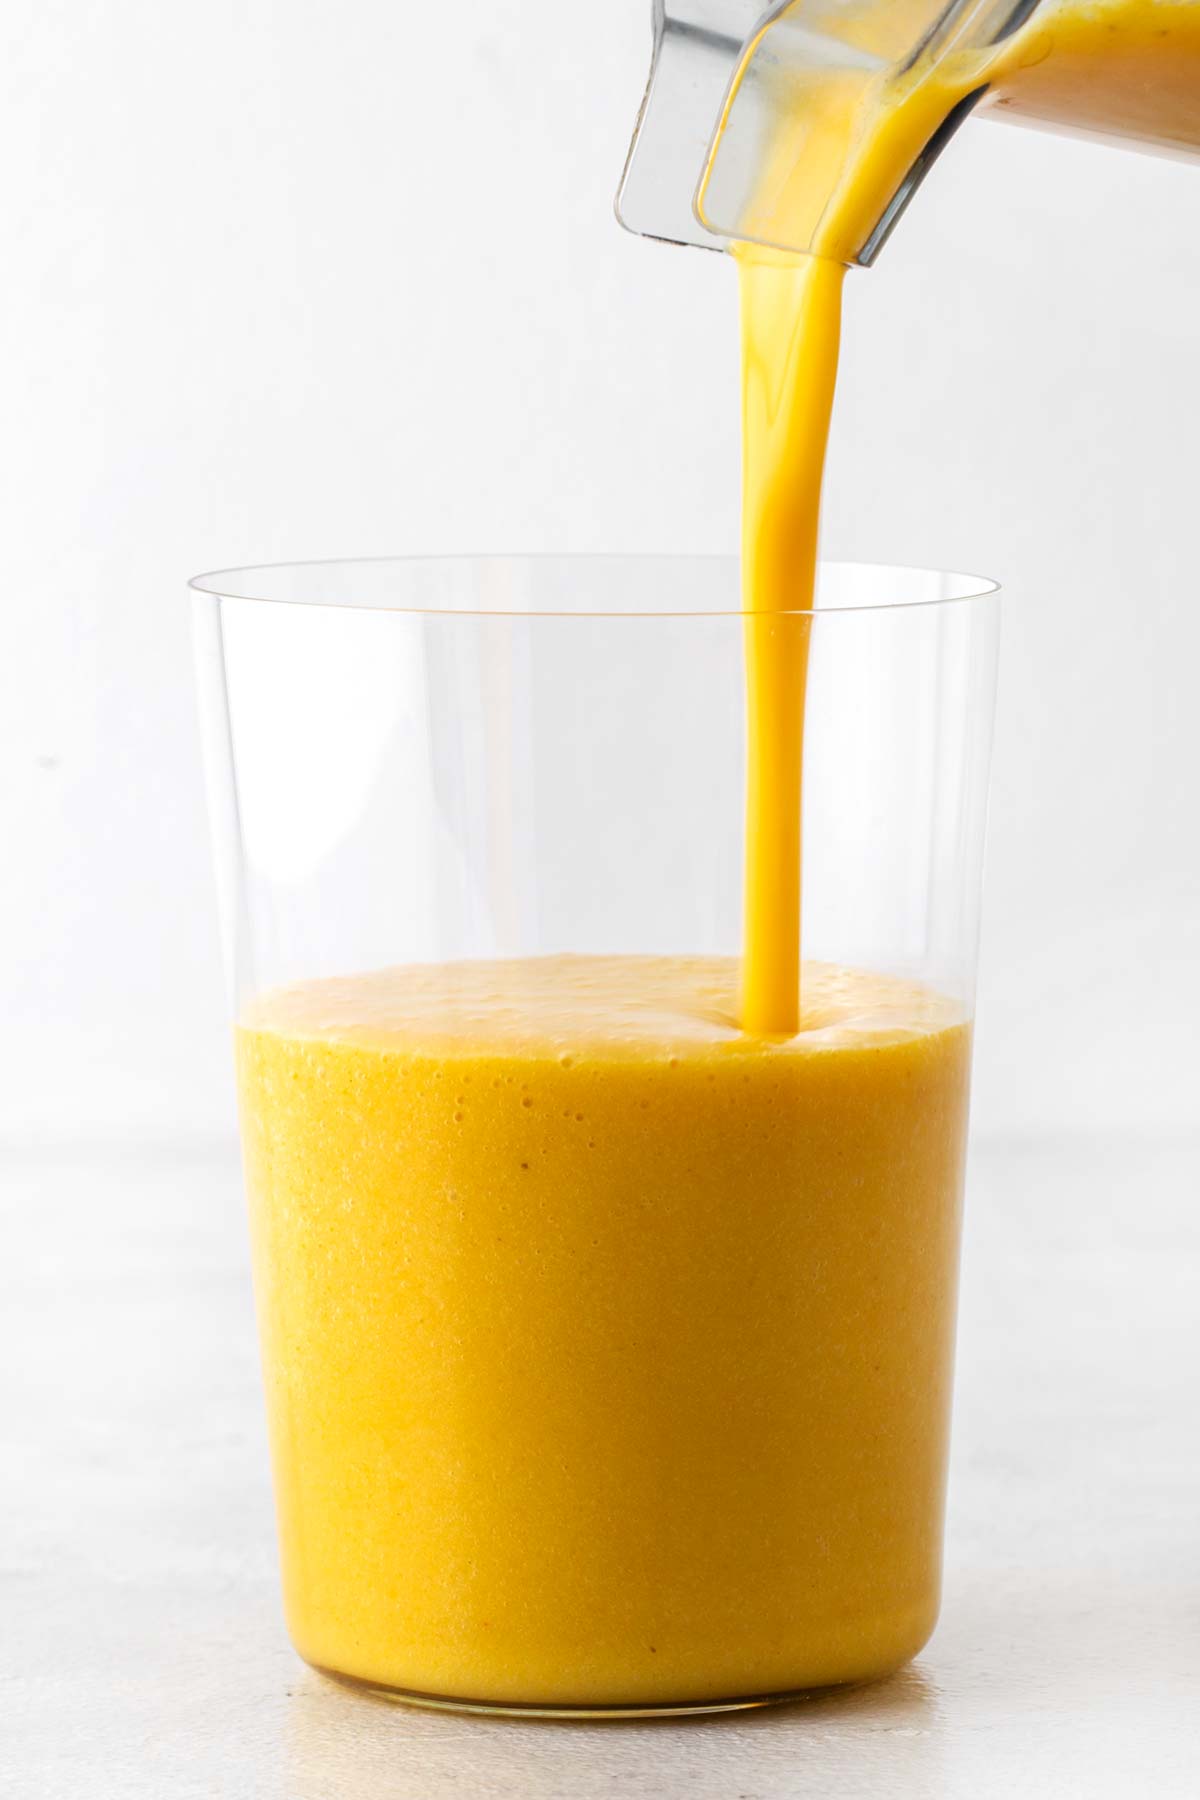 Pouring a turmeric smoothie into a glass.